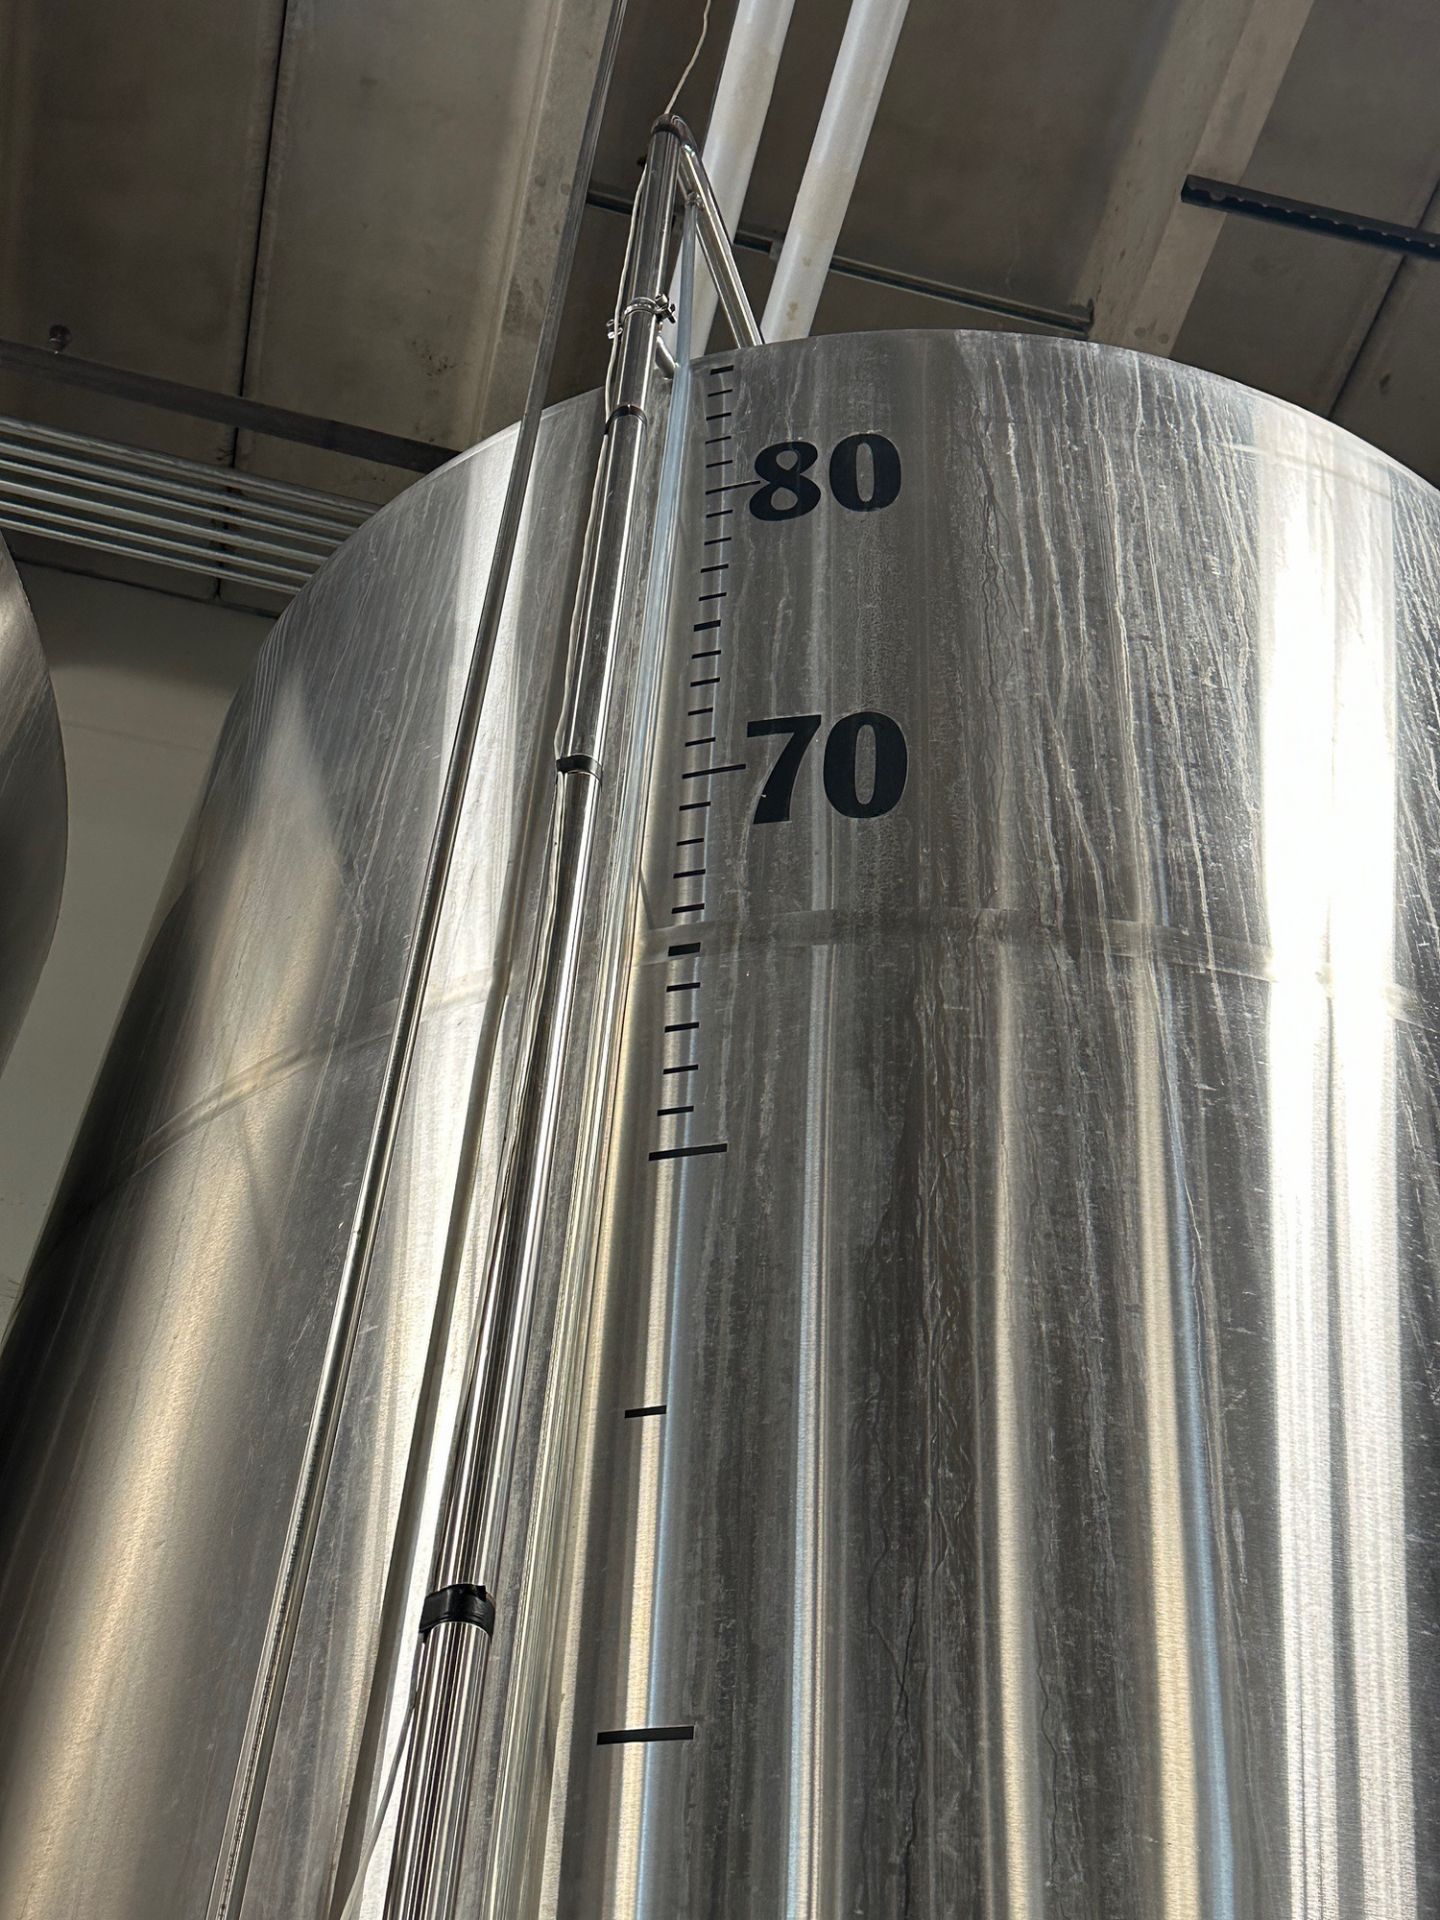 Premier Stainless 80 BBL Stainless Steel Brite Tank - Dish Bottom, Glycol Jacketed, | Rig Fee $1850 - Image 5 of 5